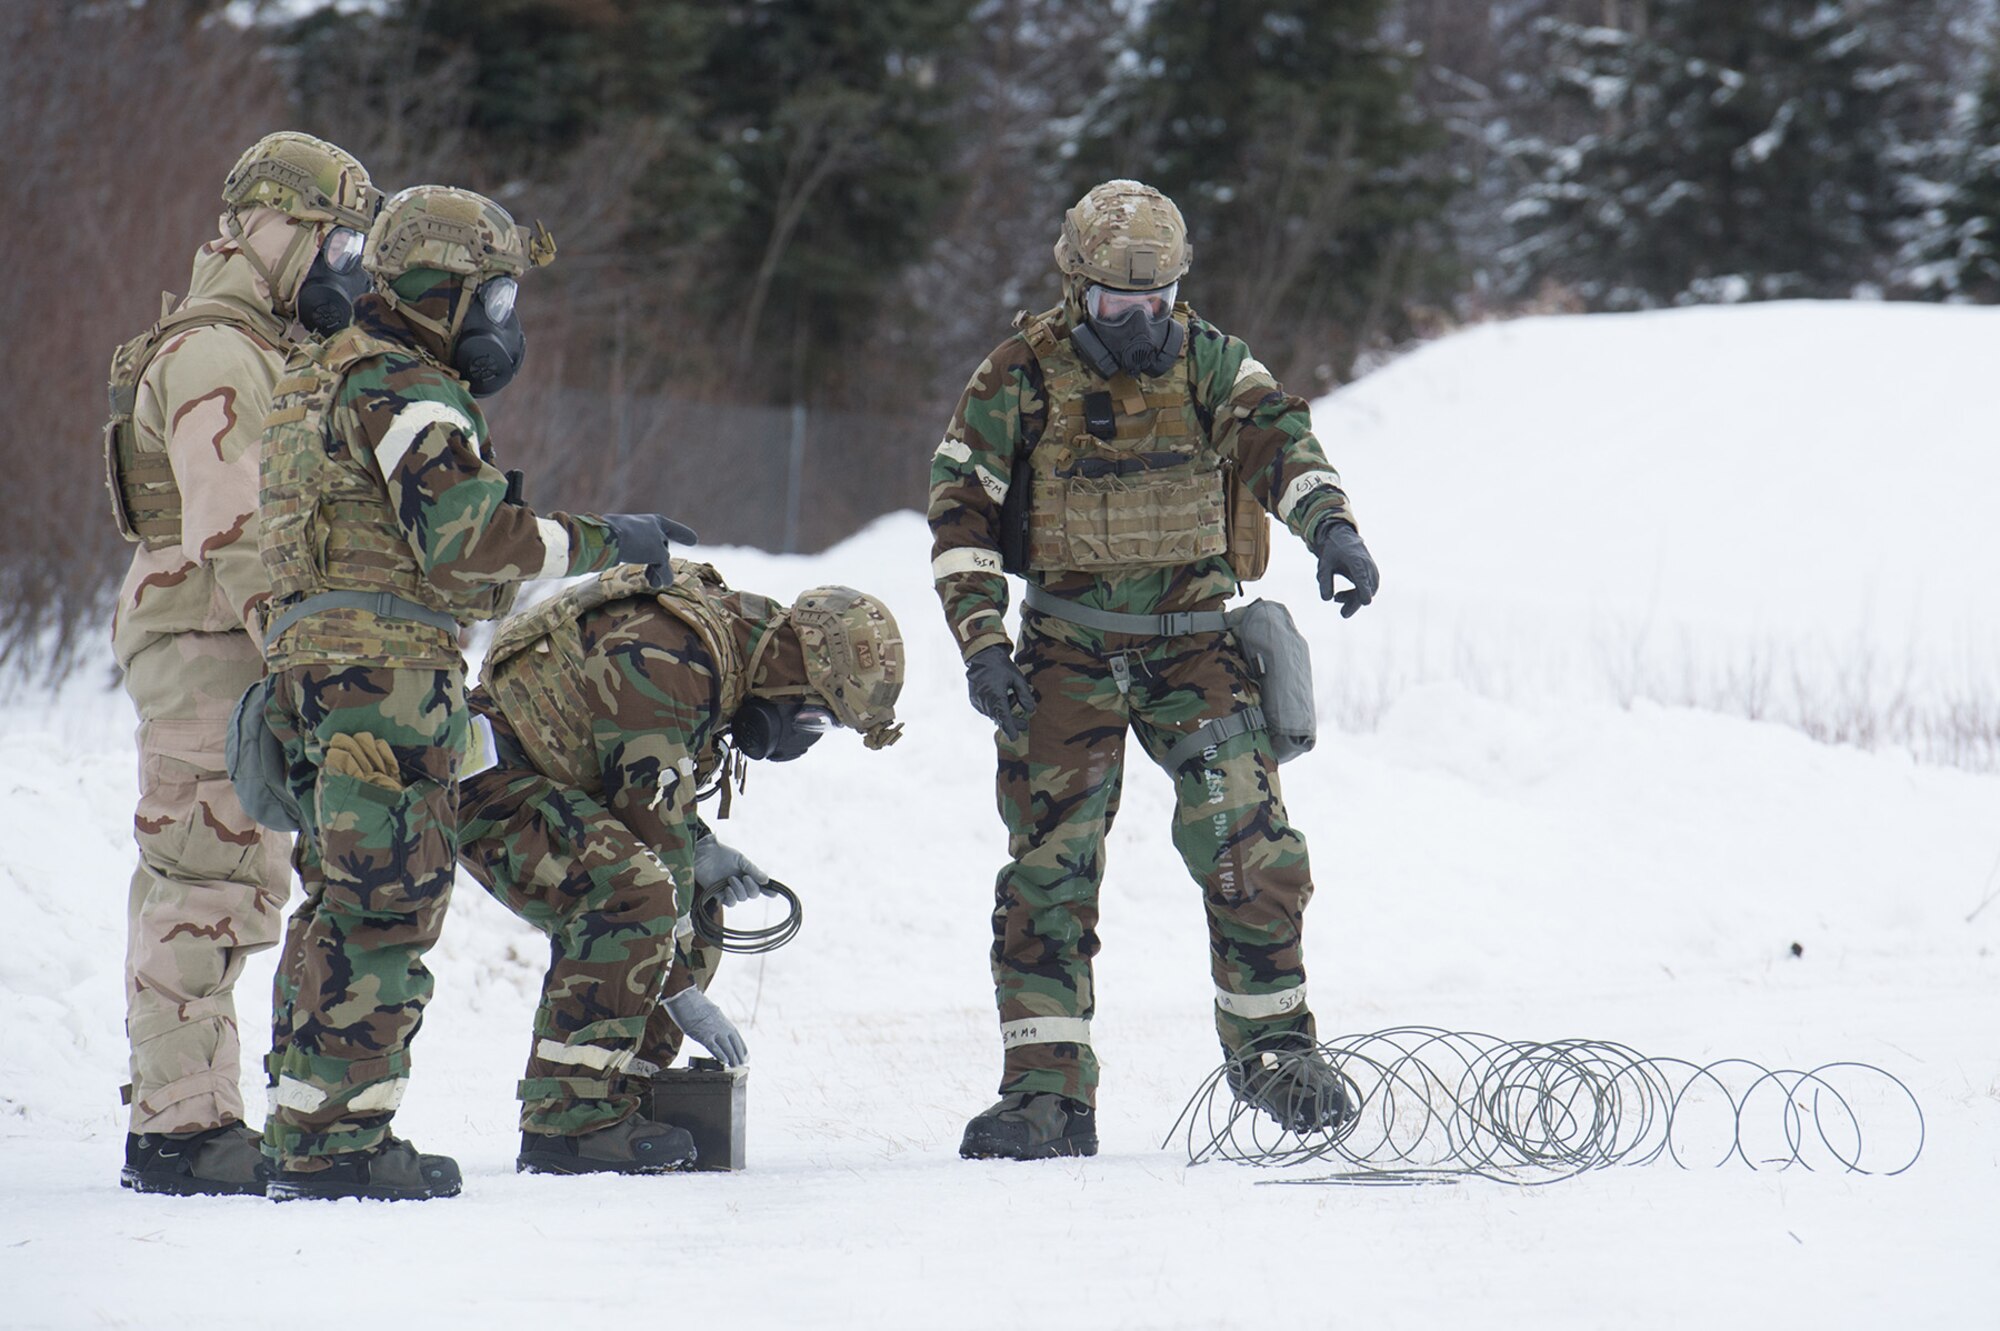 Airmen assigned to the 673d Civil Engineer Squadron, Explosives Ordinance Disposal Flight, conduct a live-fire demolitions exercise in Mission Oriented Protective Posture 4 on Joint Base Elmendorf-Richardson, Alaska, Feb.14, 2018.  The Airmen were conducting EOD training in a simulated chemical weapons contaminated environment.